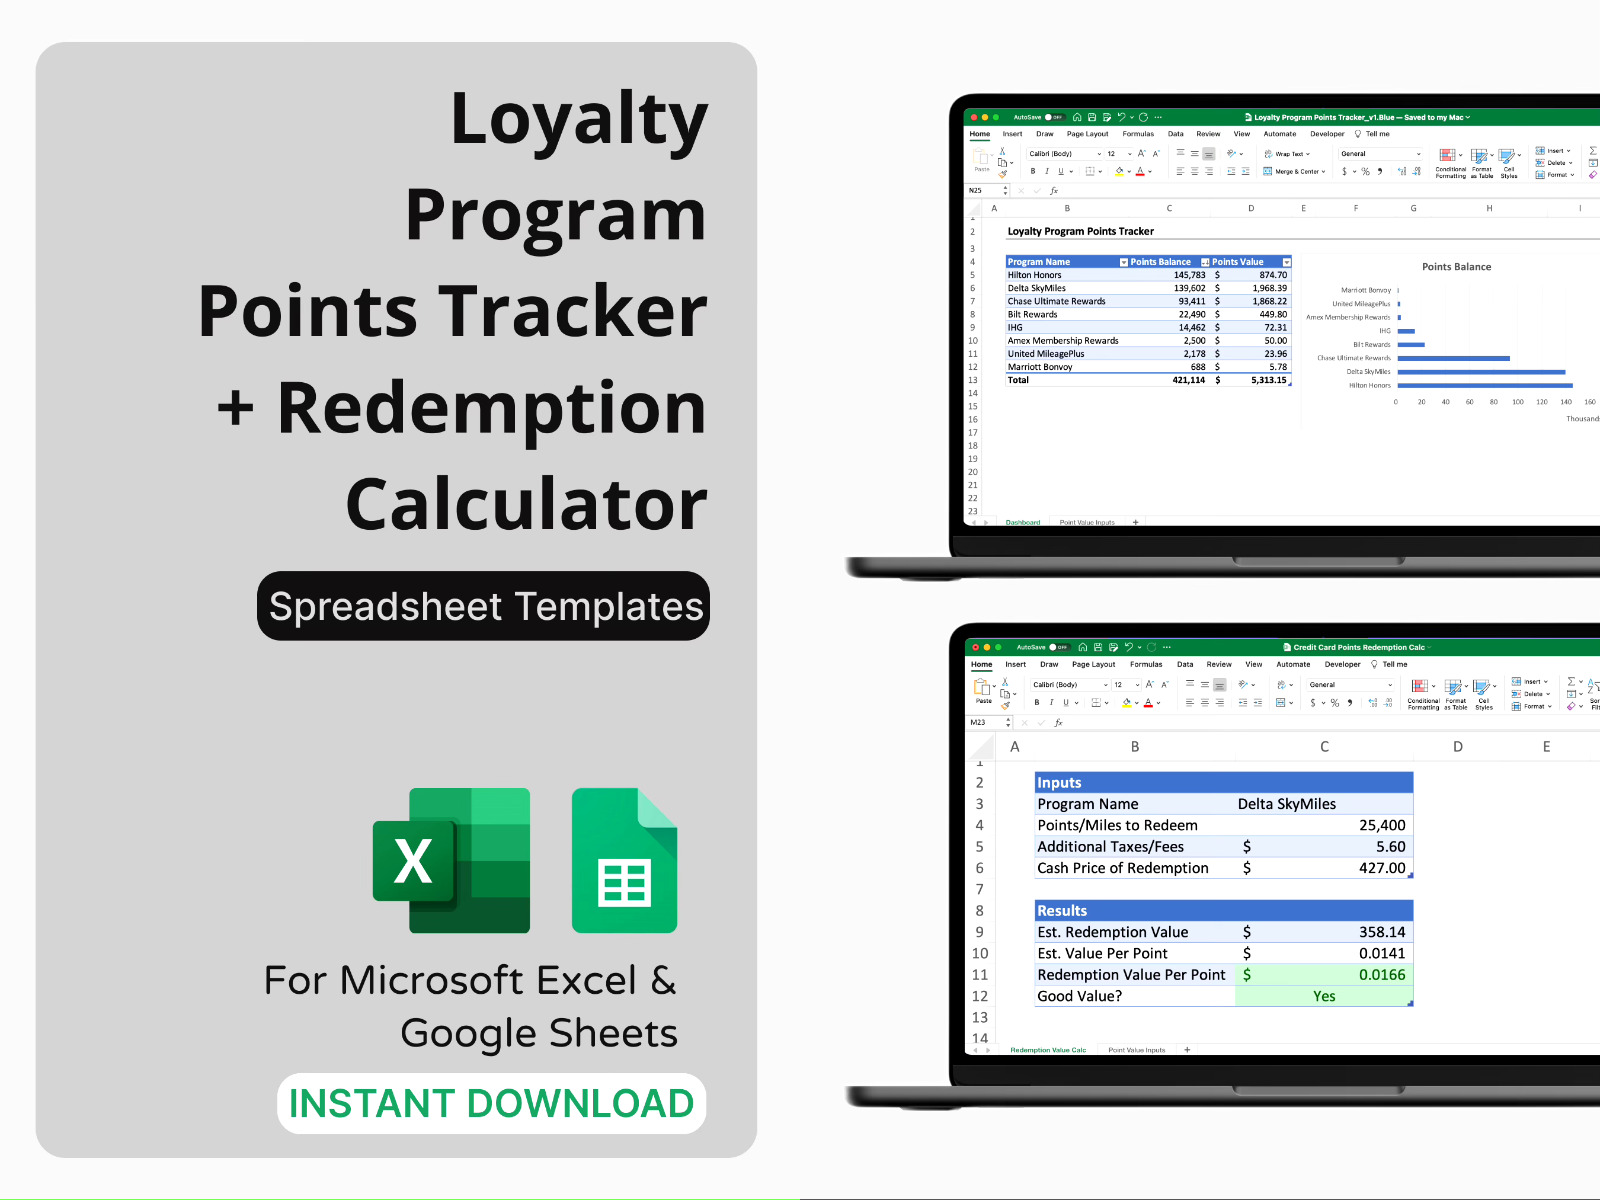 Loyalty Program Points Tracker & Redemption Calculator for Credit Card Points